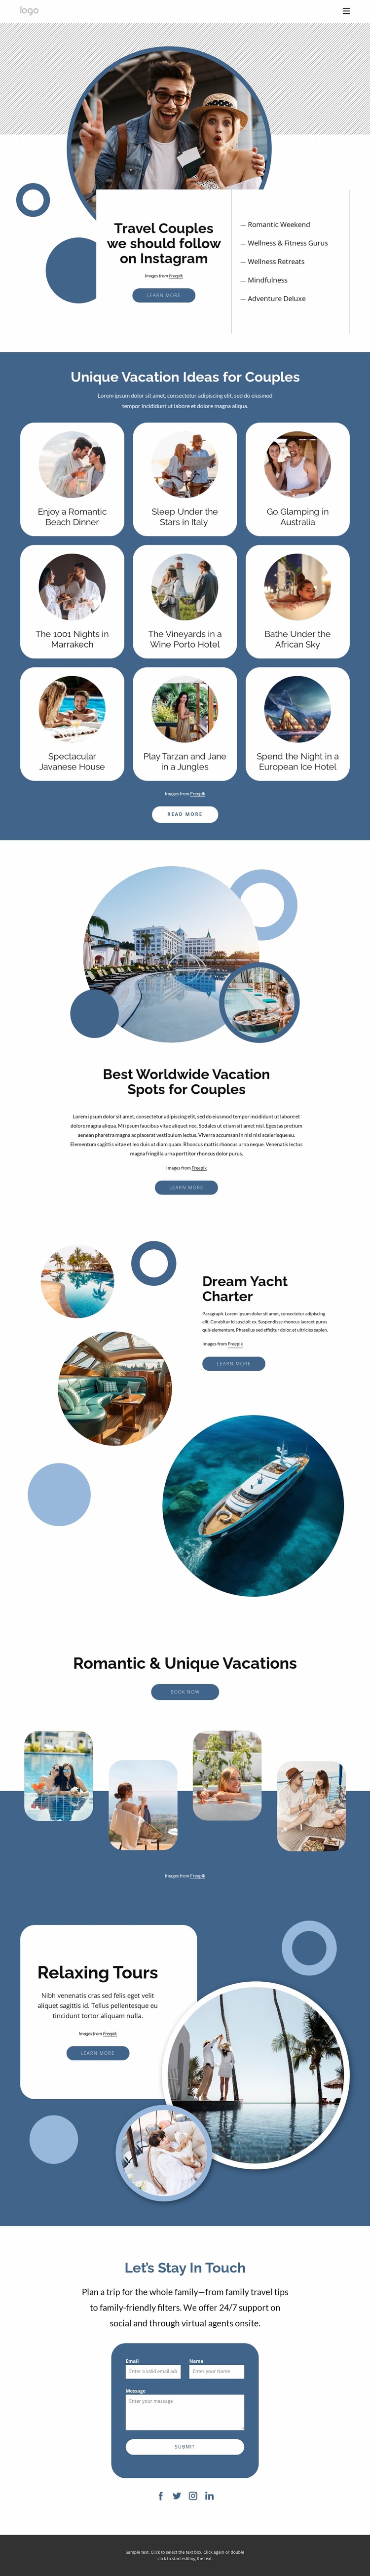 Imagine travelling to some of the most amazing places Website Template